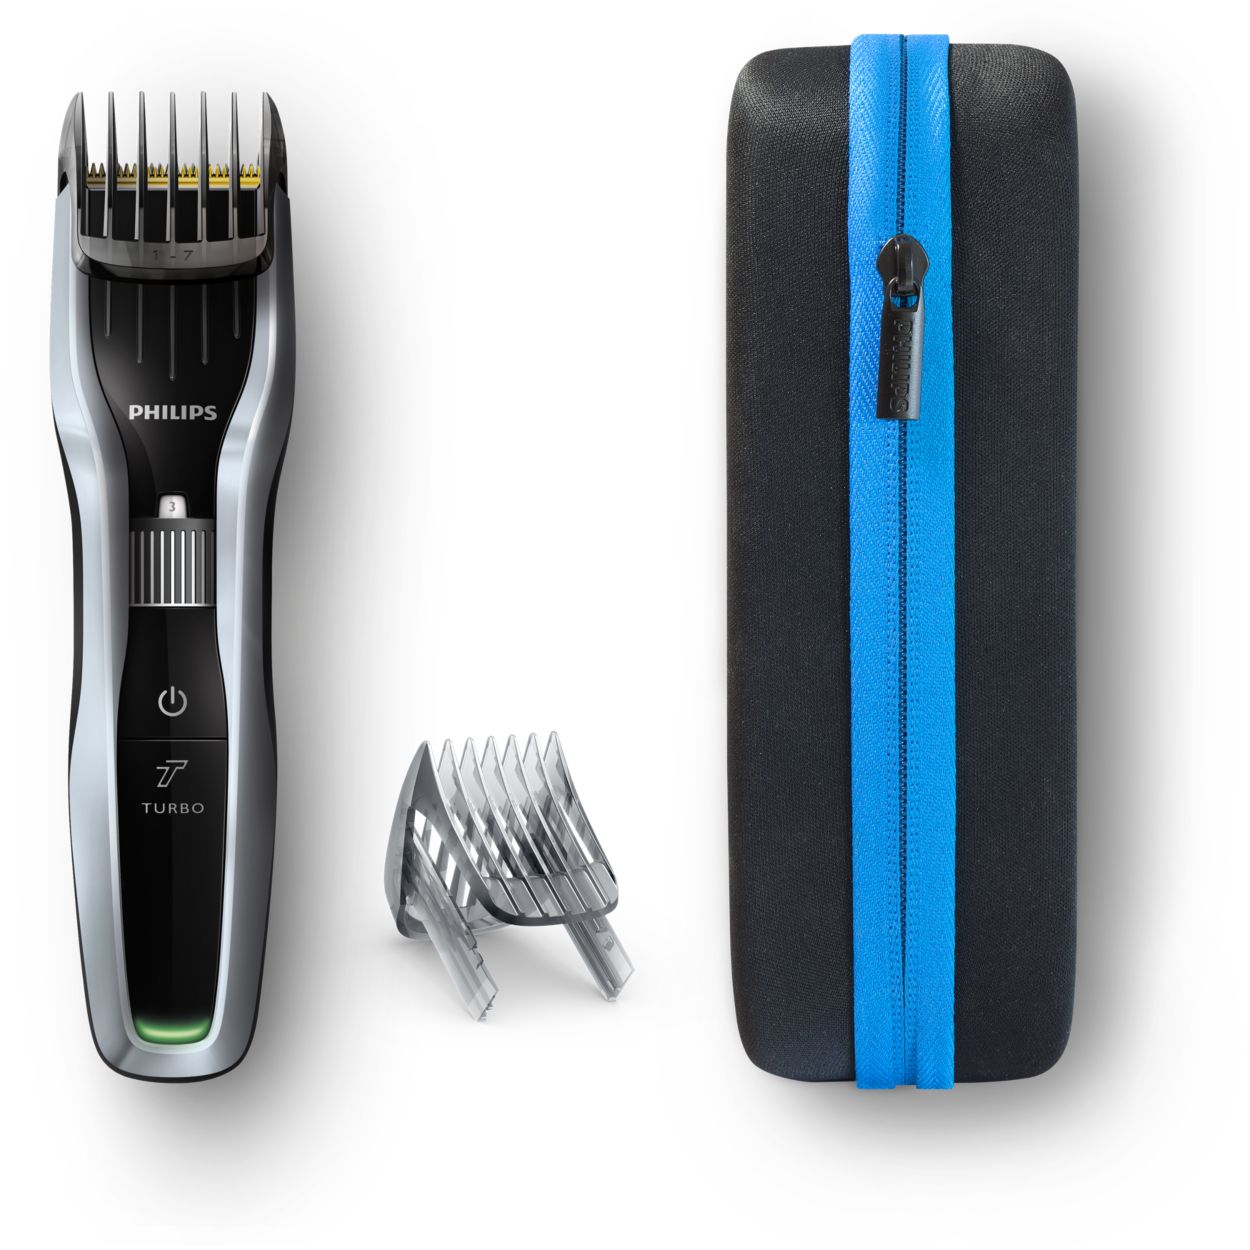 HAIRCLIPPER Series 5000 - Cuts twice as fast*